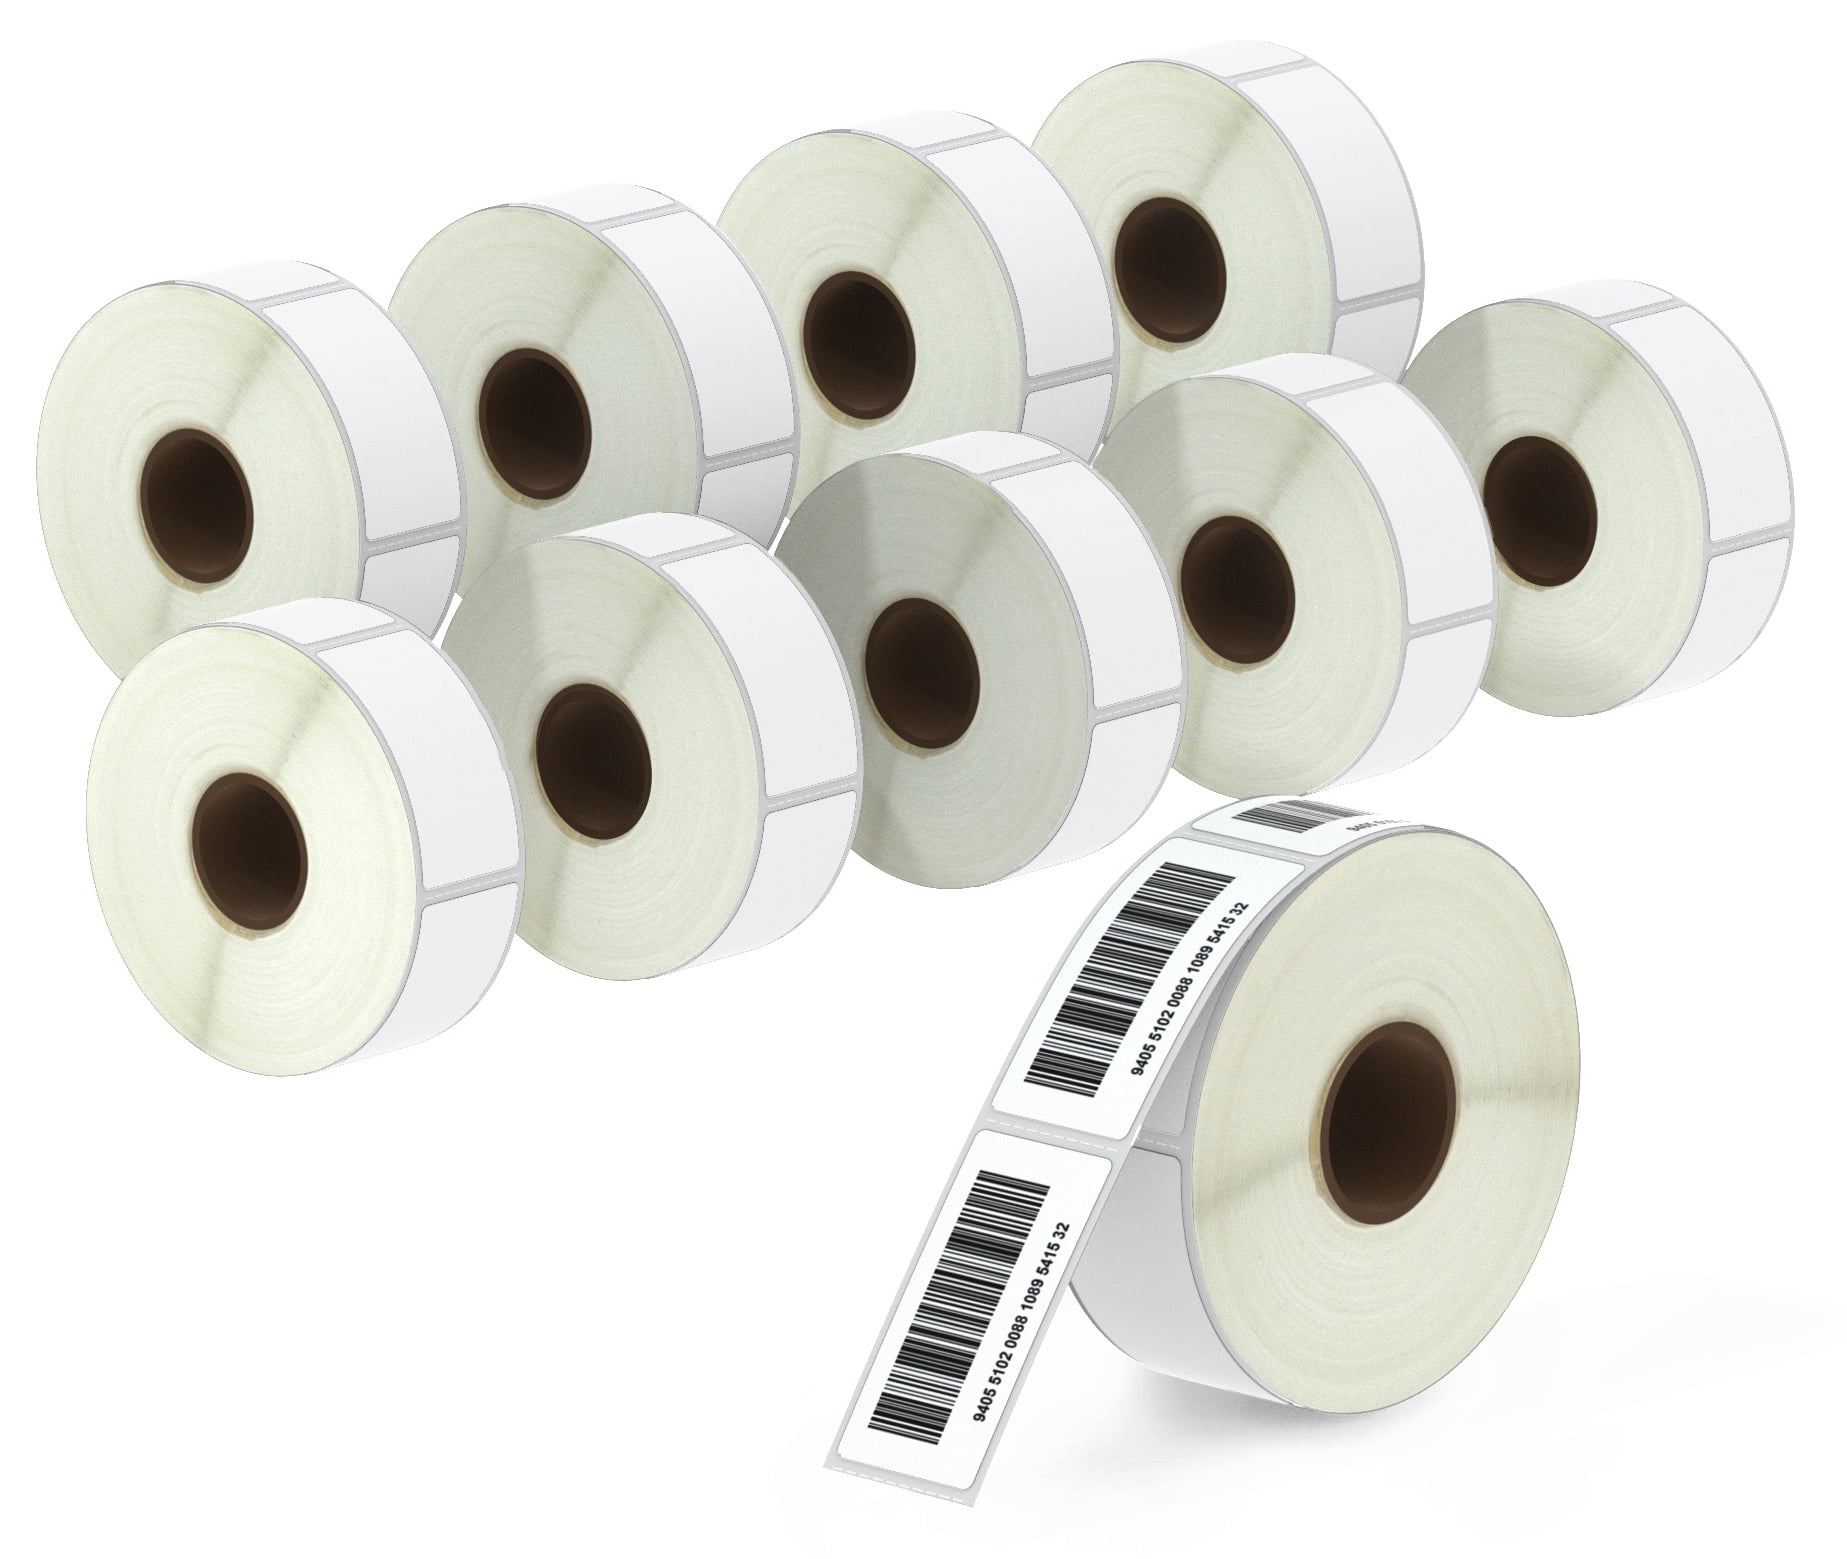 38mm x 25mm WHITE Direct Thermal Labels 2,000 per roll for compatible Zebra type 